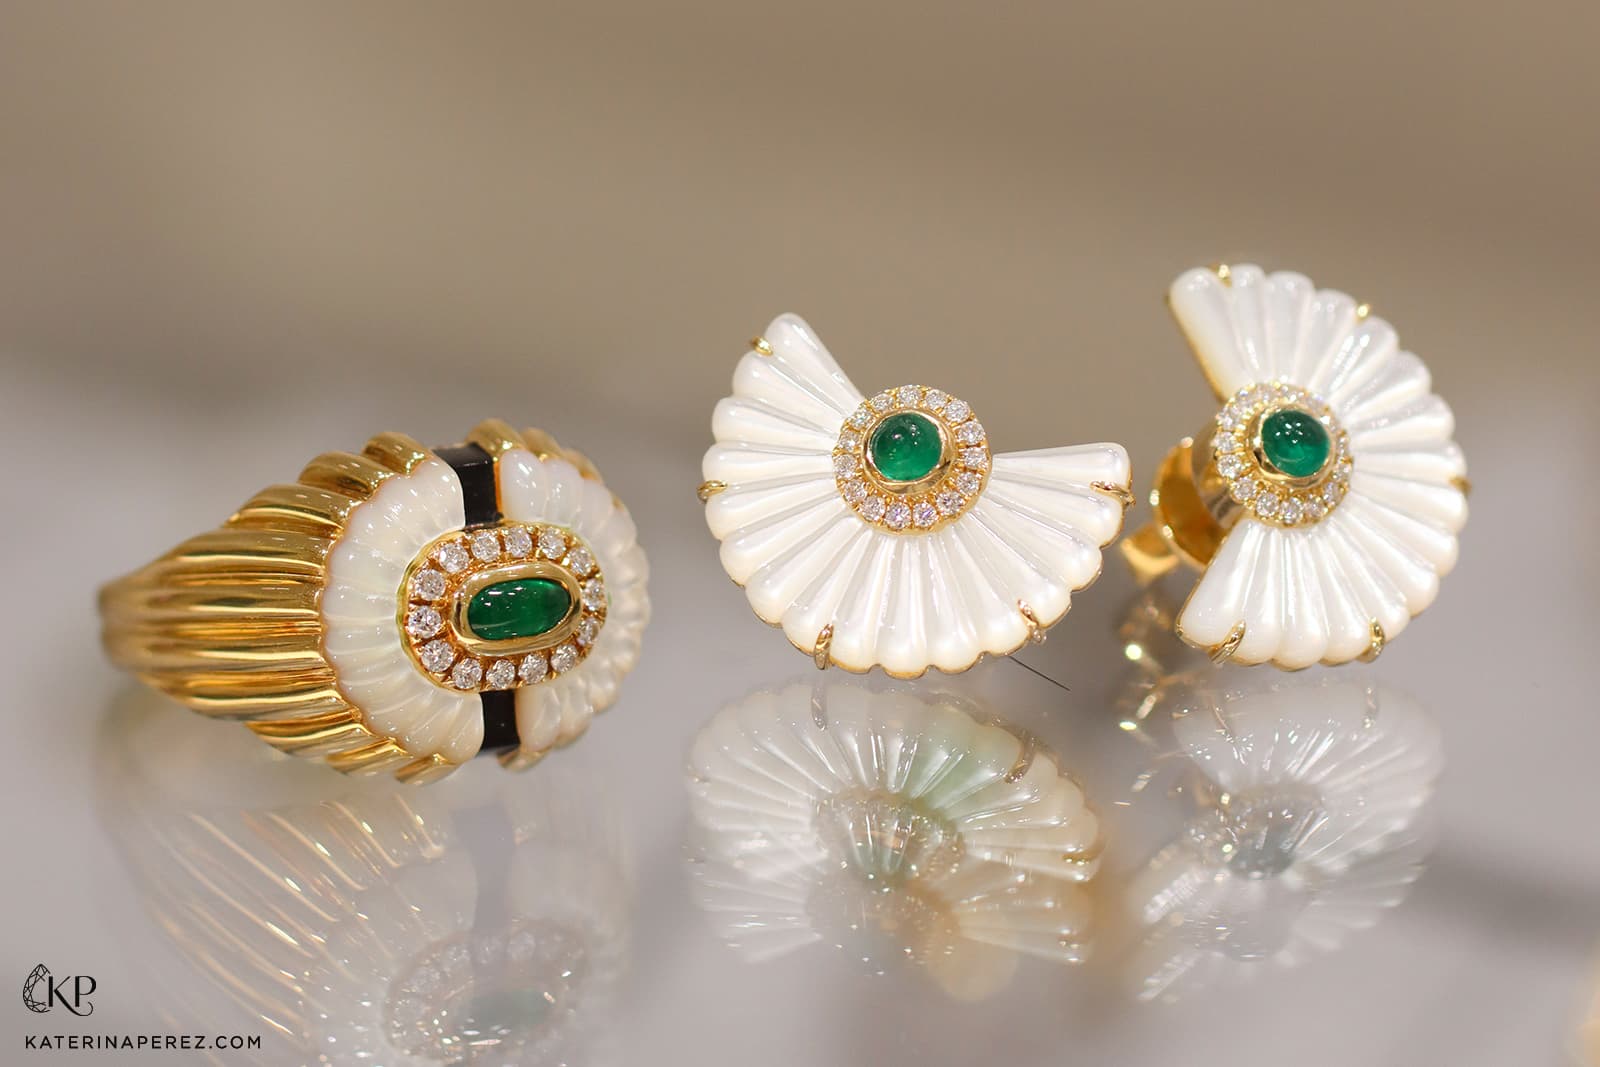 State Property Alara Snowdrop ring and earrings with emerald cabochons, diamonds, carved mother of pearl and black enamel in 18k yellow gold